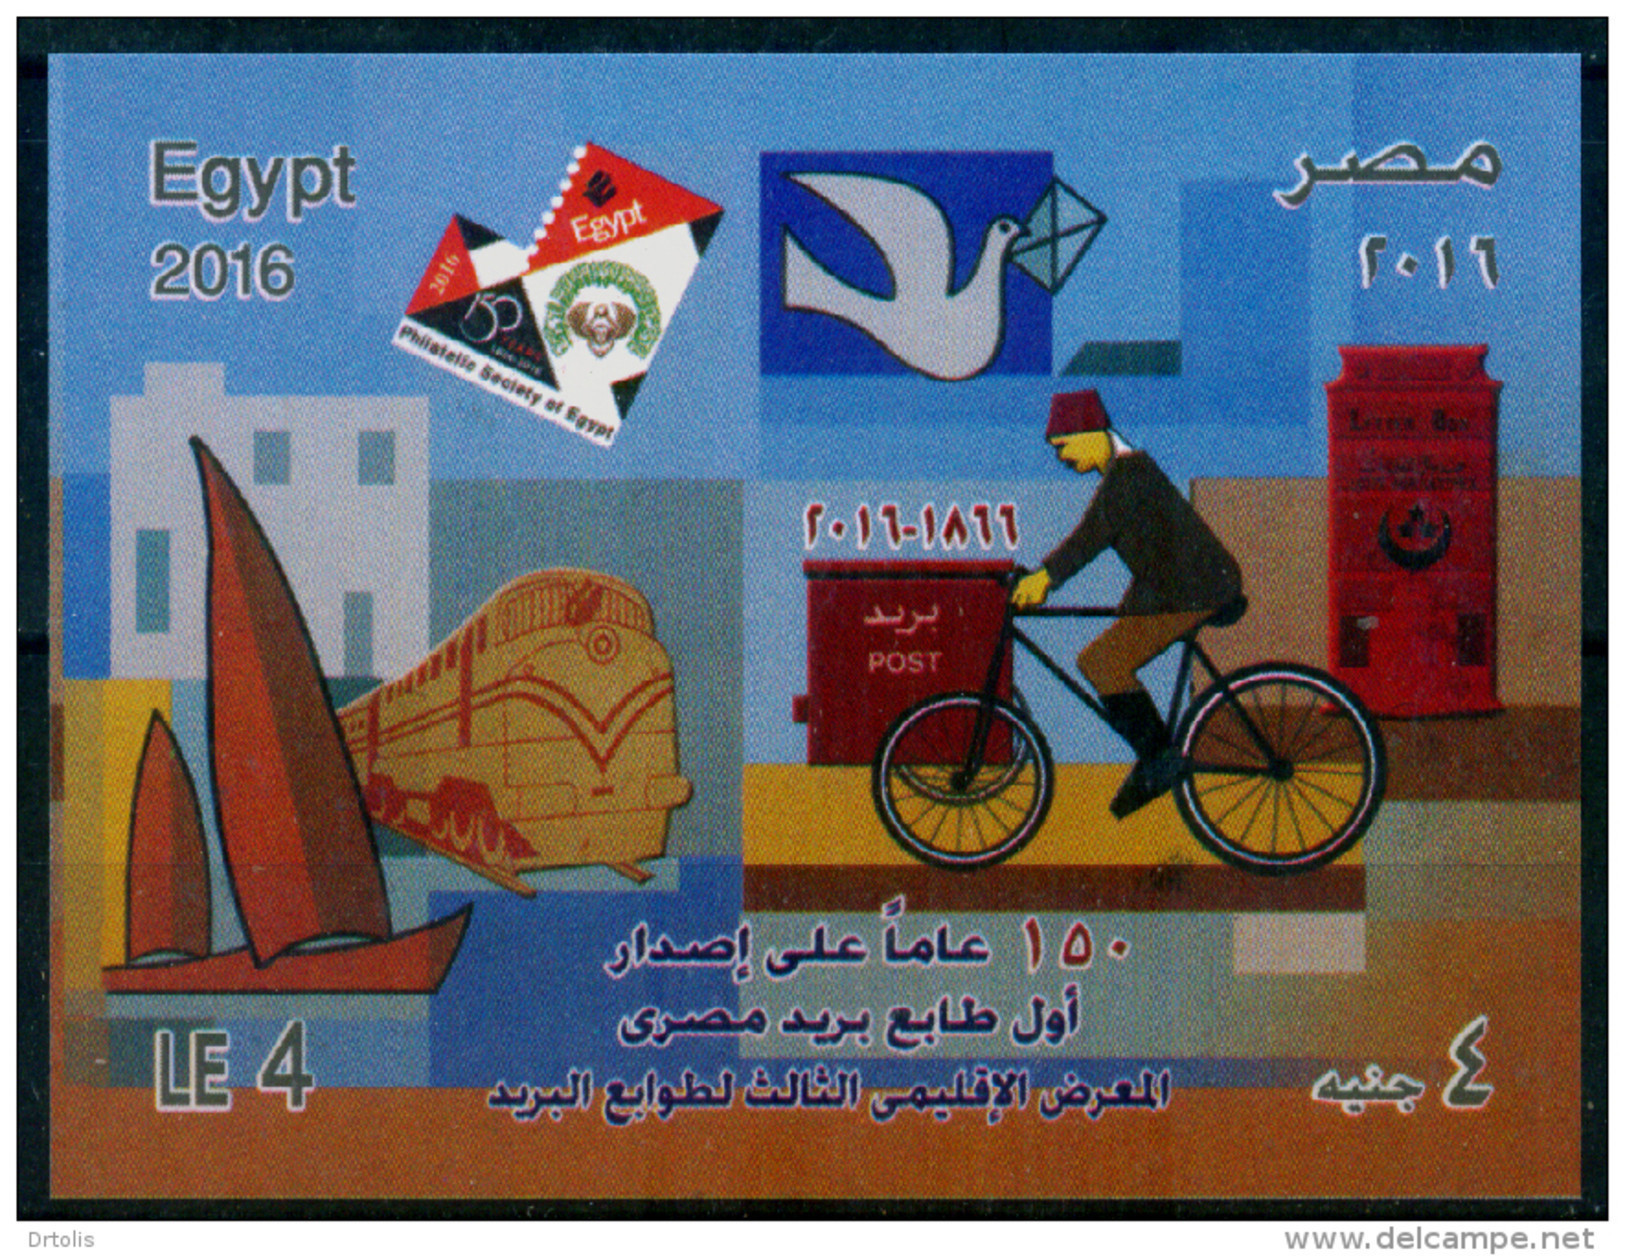 EGYPT / 2016 / POST DAY / 1ST EGYPT STAMP : 150 YEARS / BICYCLE / LETTER BOX / DIESEL TRAIN / DHOWS / MNH / VF - Ungebraucht